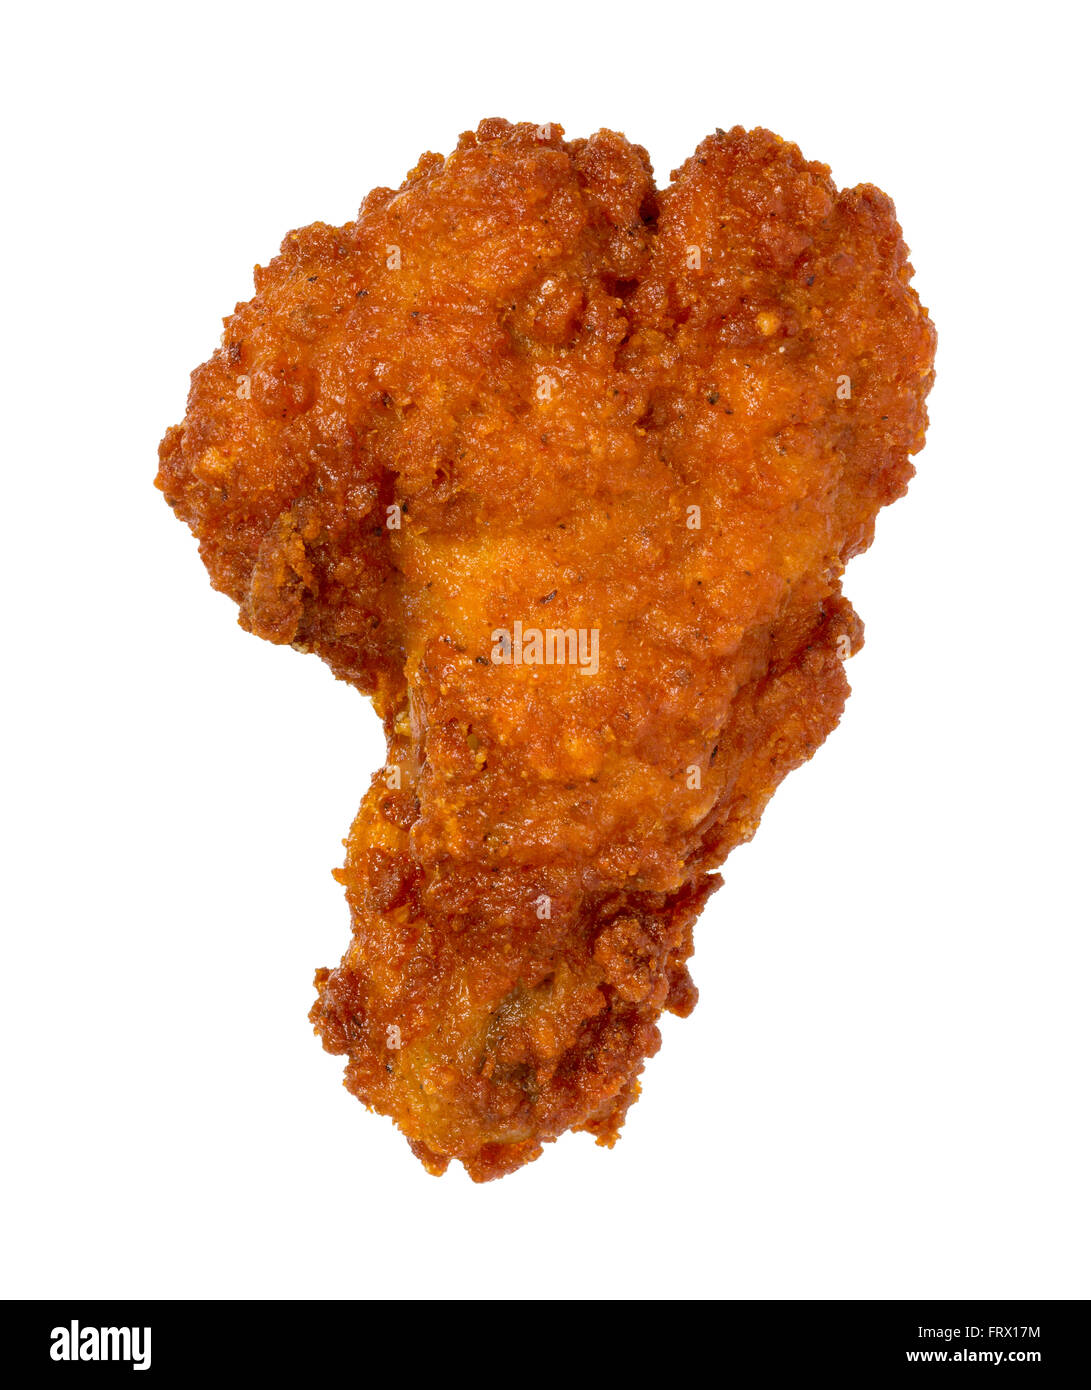 Buffalo Chicken Wing. This appetizer has become a popular bar food. The image is a cut out, isolated on a white background. Stock Photo